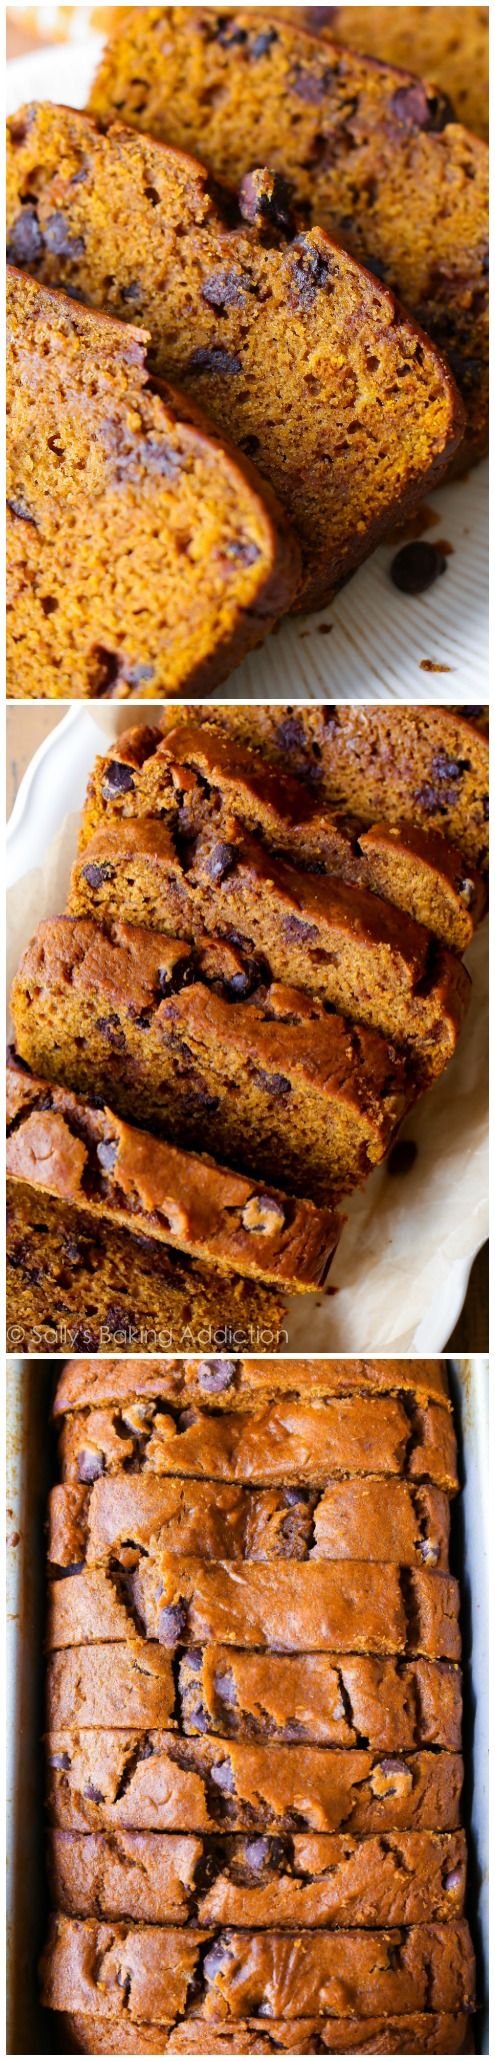 This recipe makes one heck of a super-moist pumpkin bread! This fall favorite is packed with sweet cinnamon spice, chocolate chips, and tons of pumpkin flavor. #cookies #fall #fallbaking #bakingforfall #thanksgiving #thanksgivingfood #cooking #recipes #dinnerideas www.gmichaelsalon.com